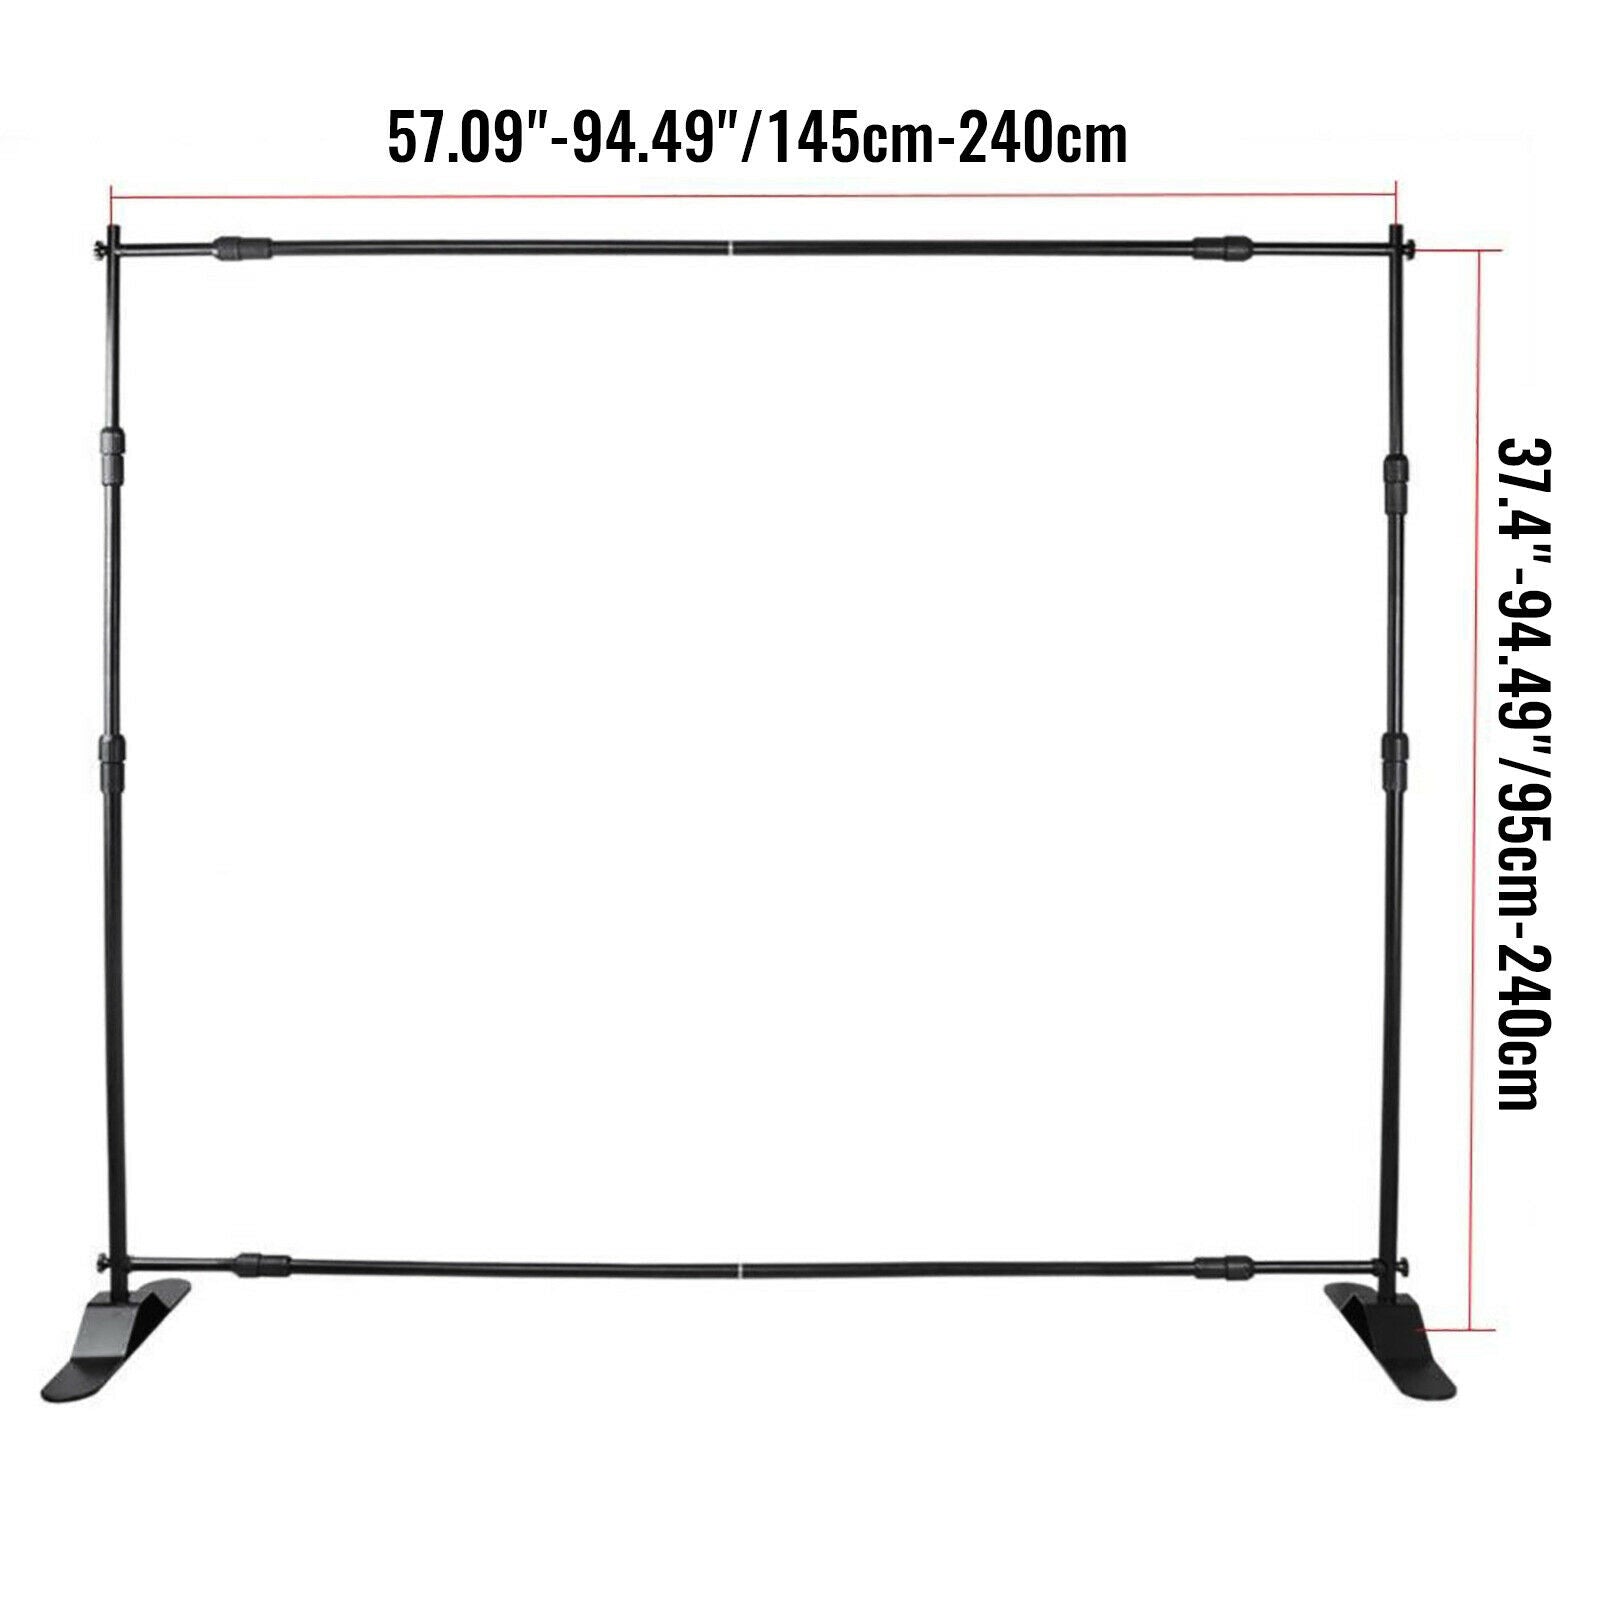 Backdrop Banner Stand, Adjustable Height & Width, Heavy-Duty